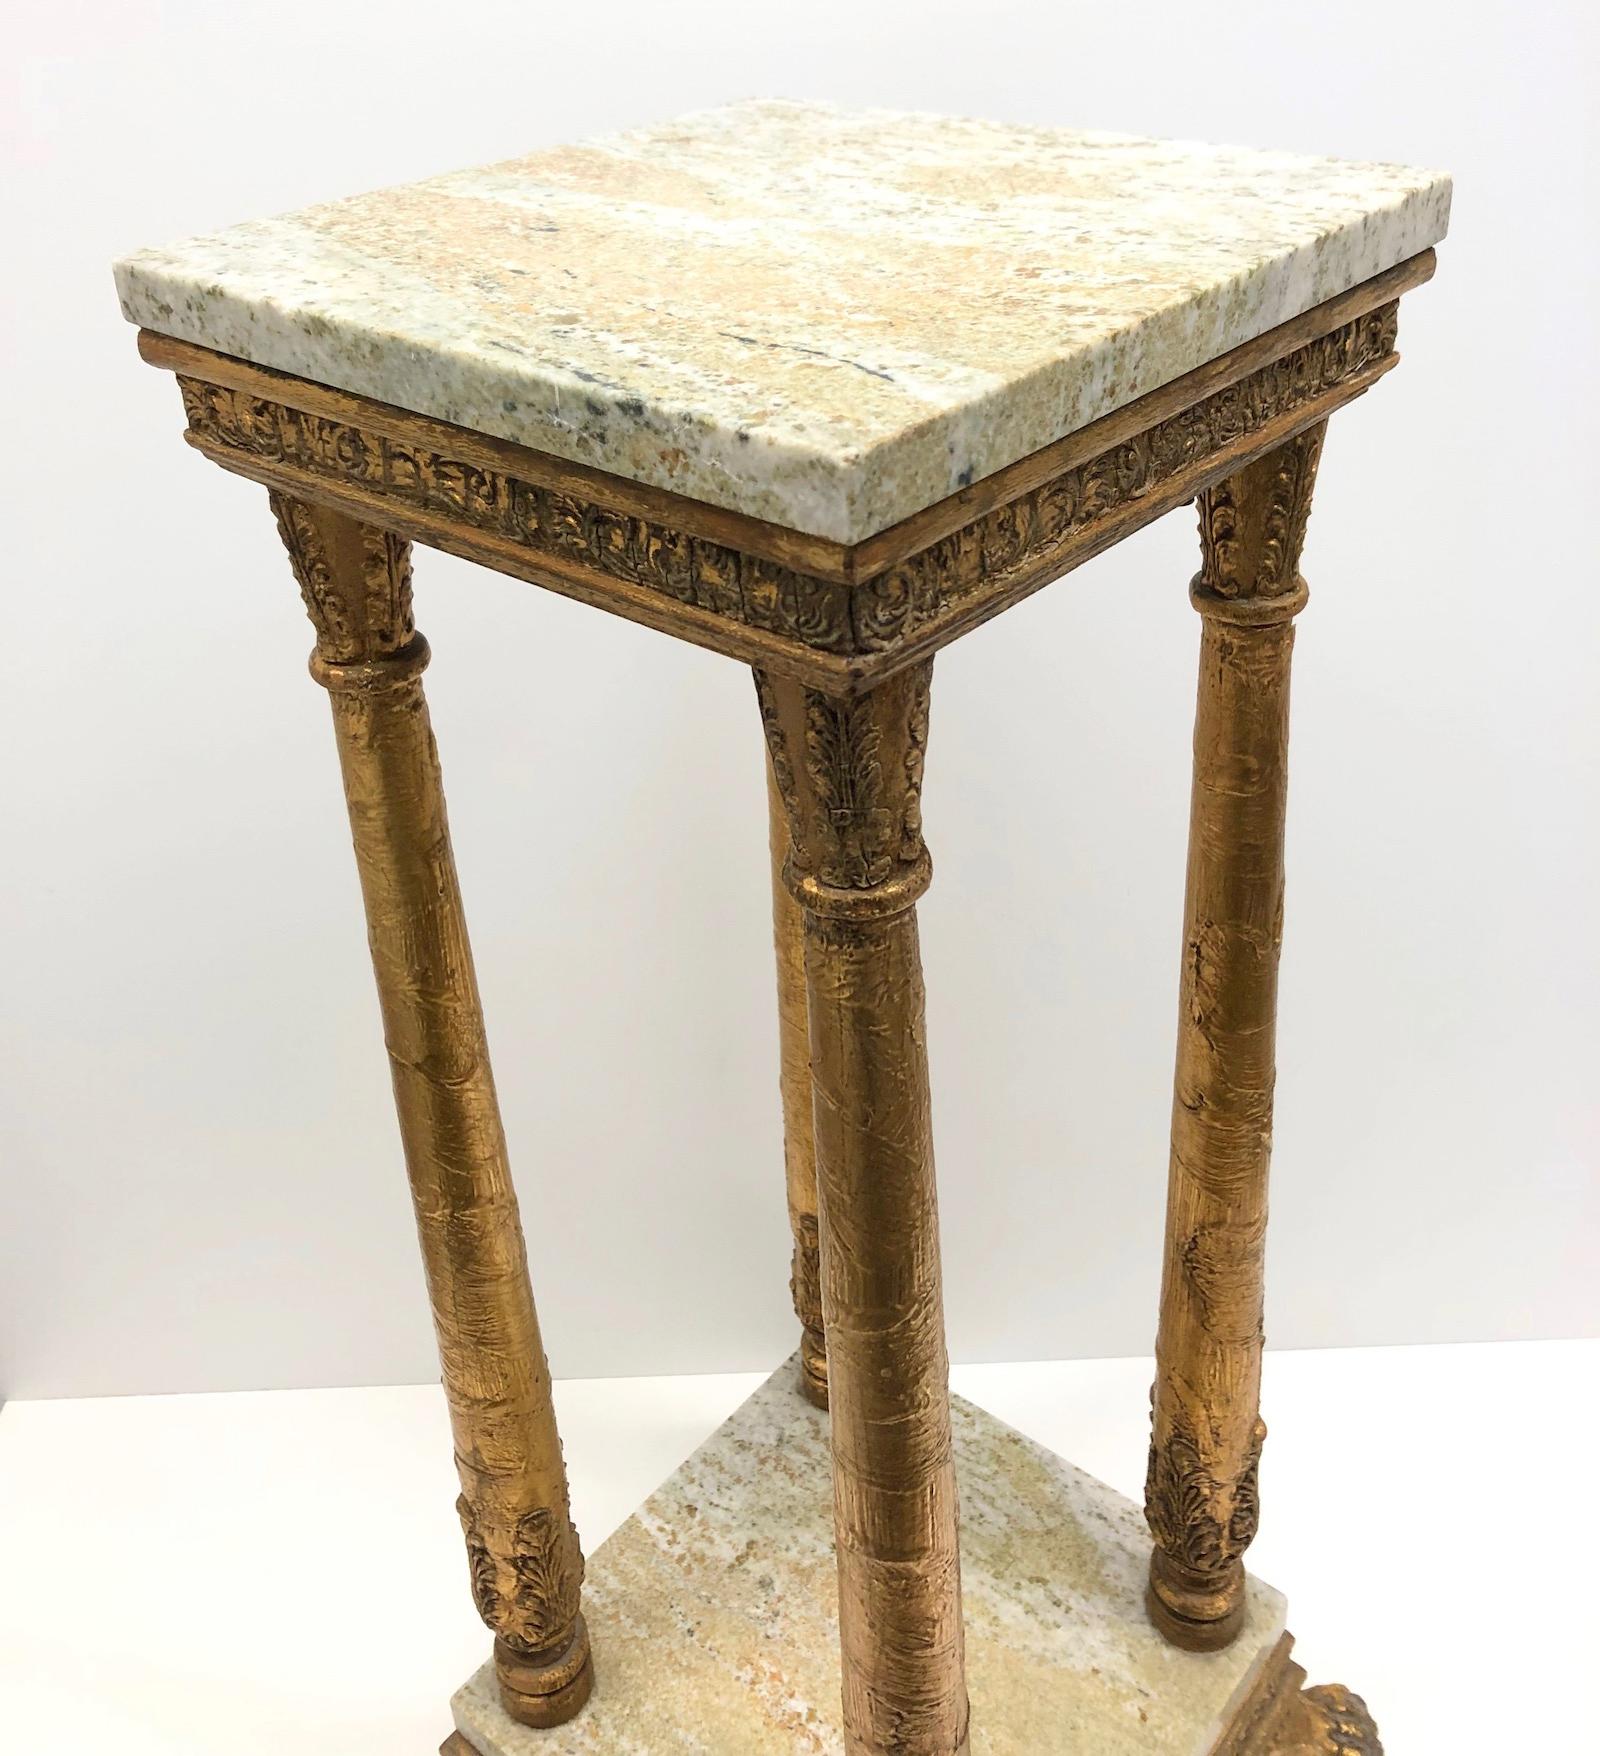 Marble Late 19th Century Carved Gilt wood Tole ware Console Pedestal Table German